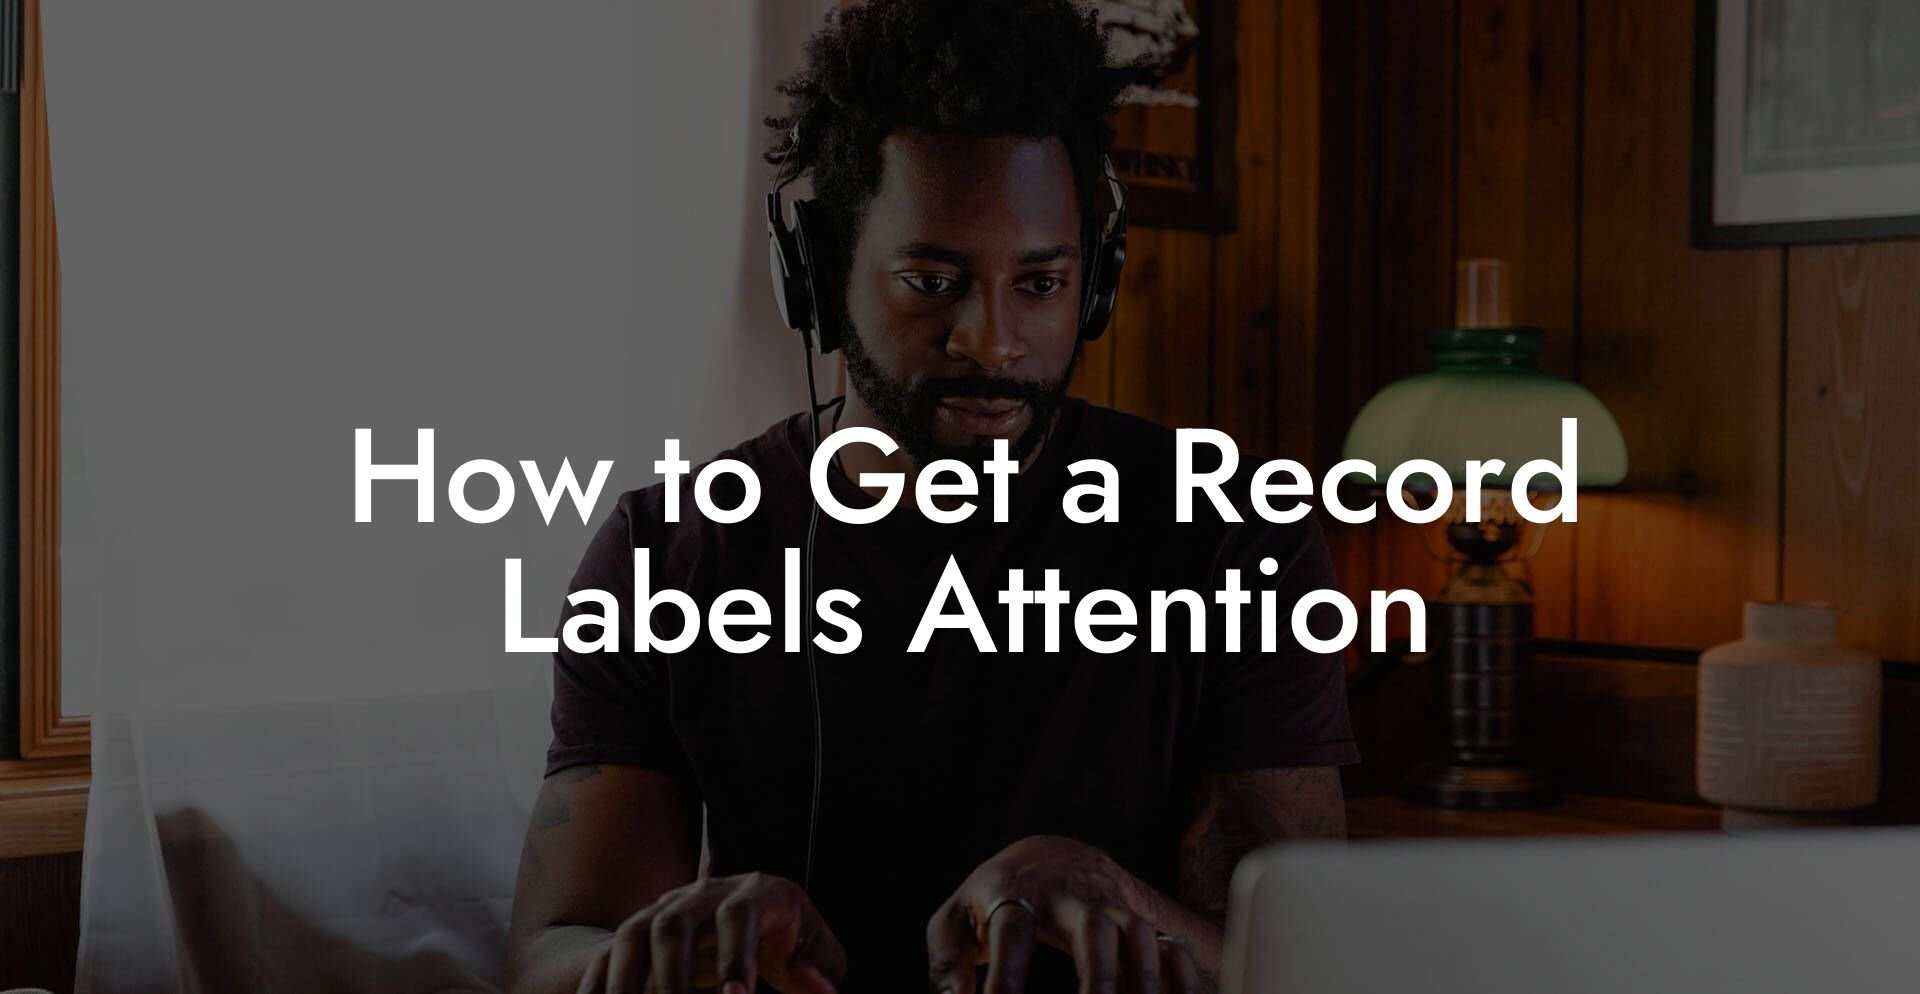 How to Get a Record Labels Attention